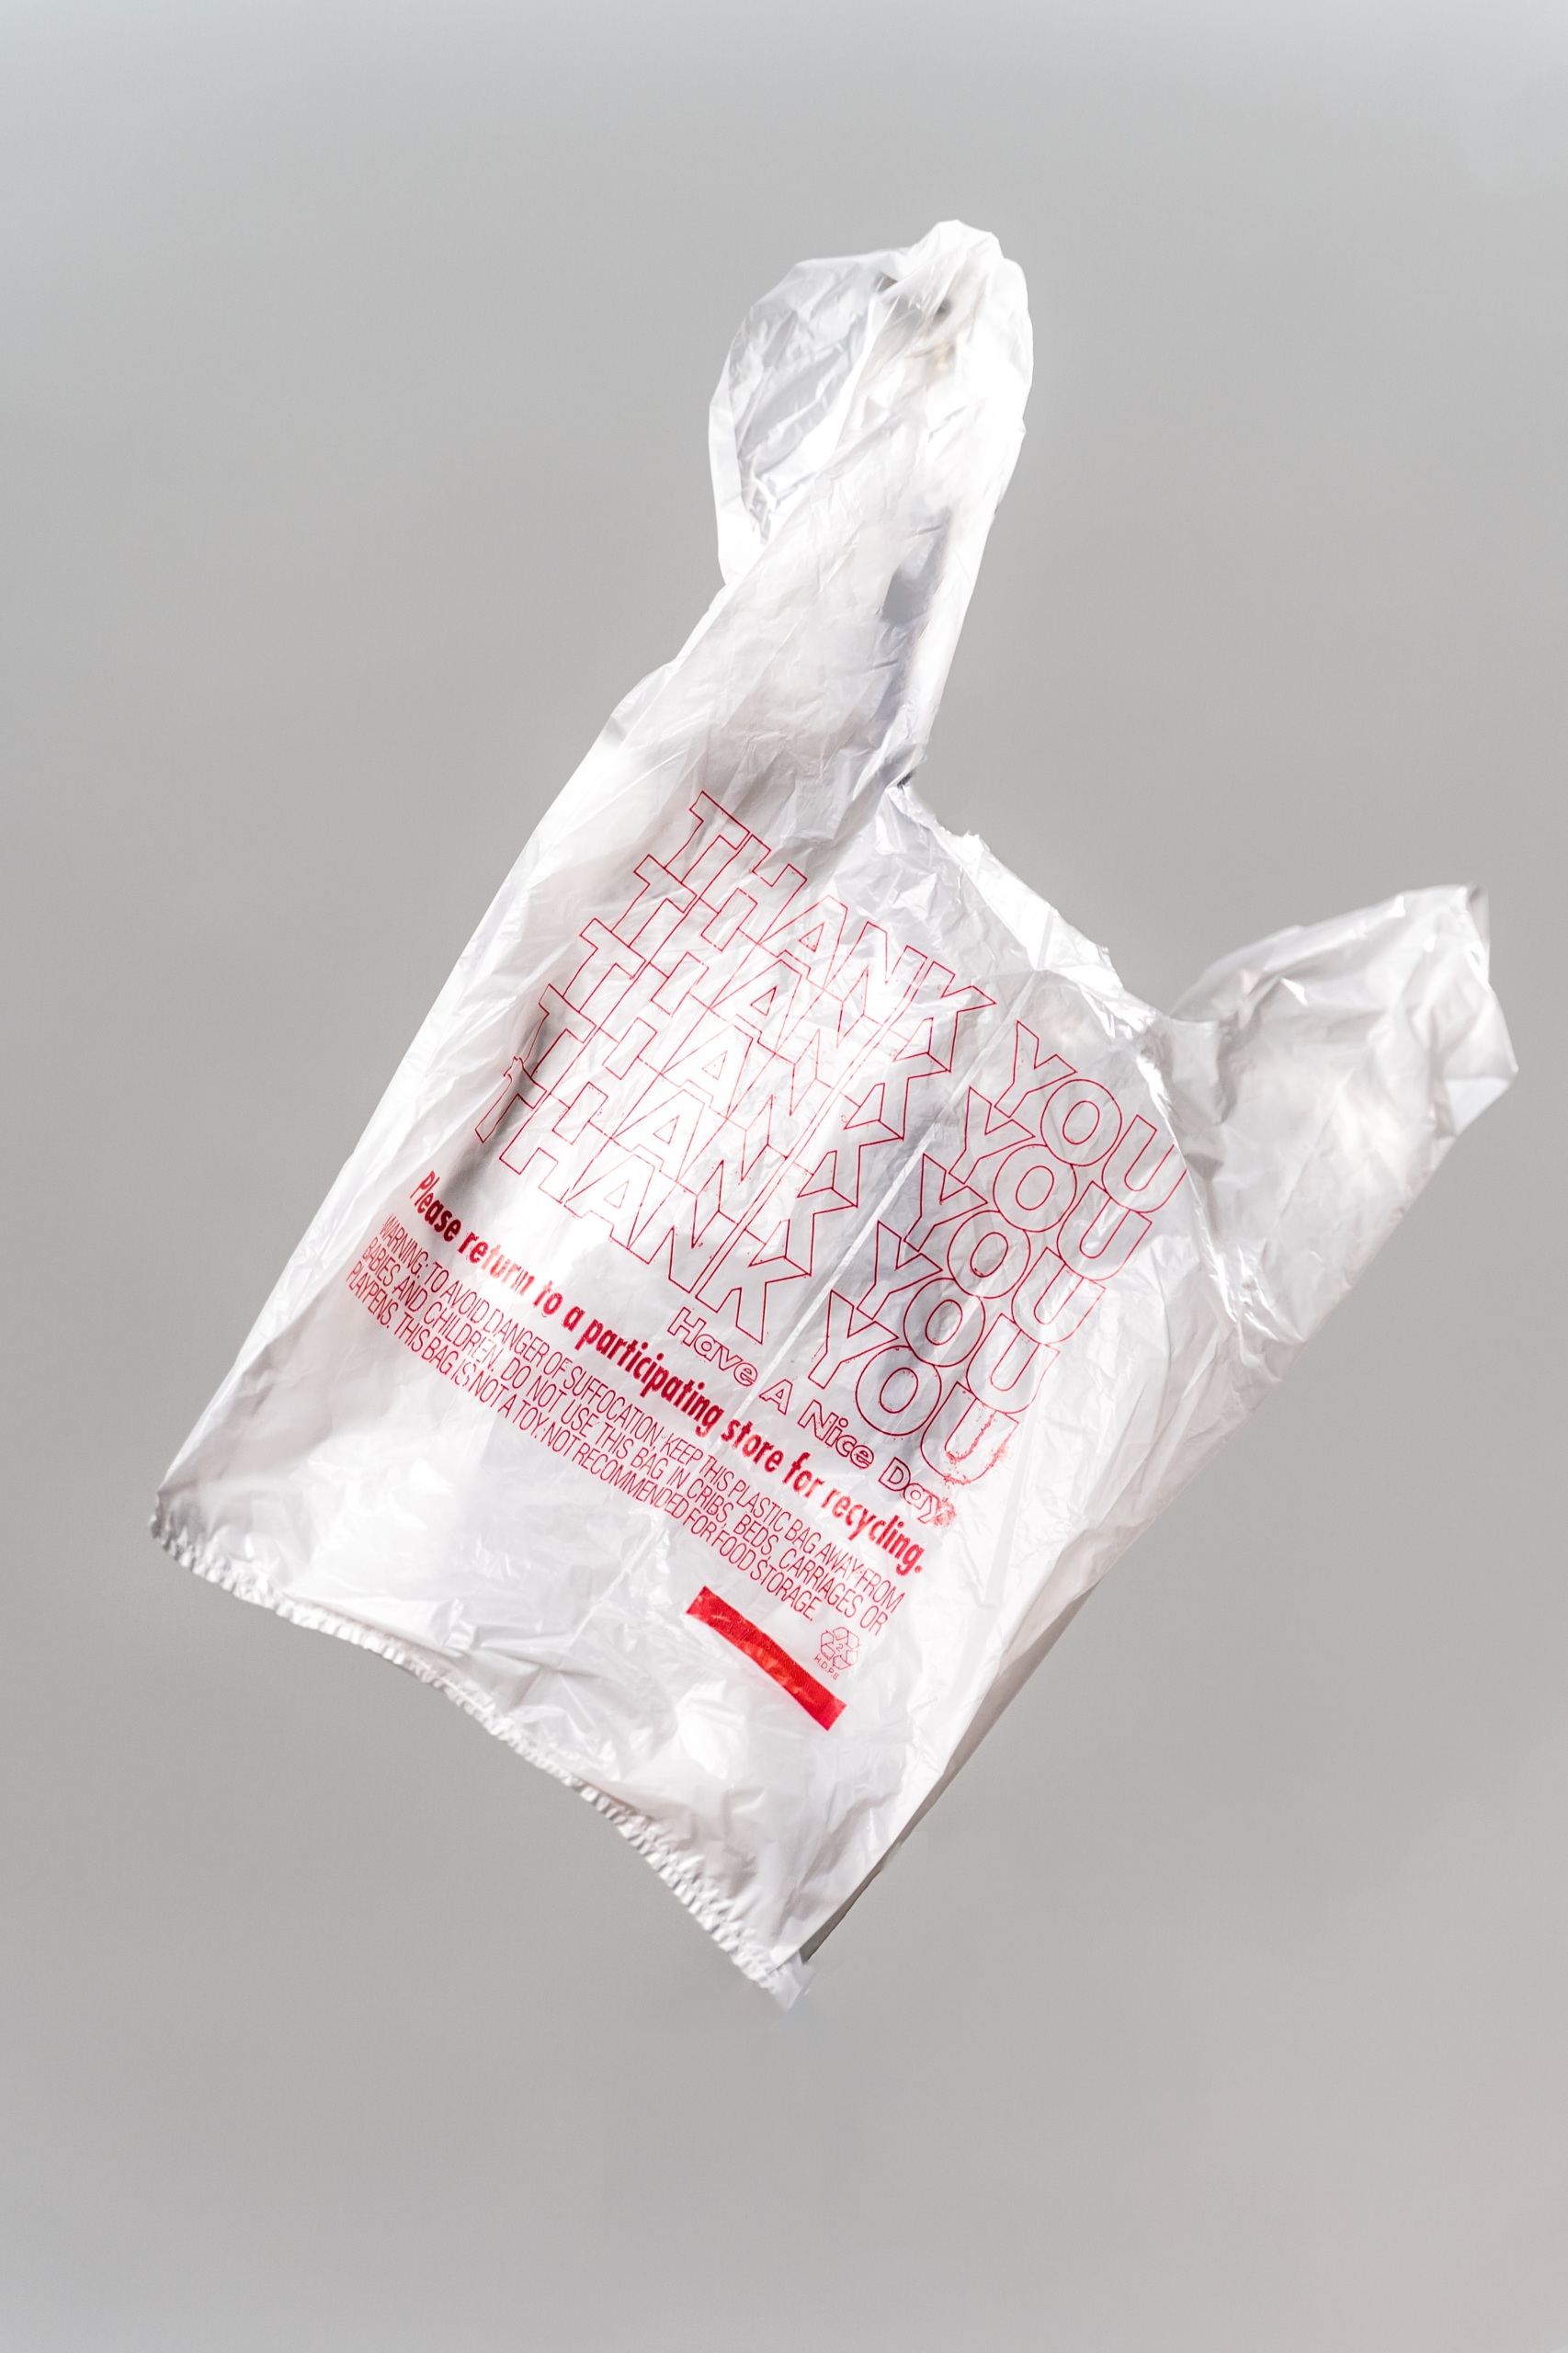 A plastic bag floats in front of a gray background